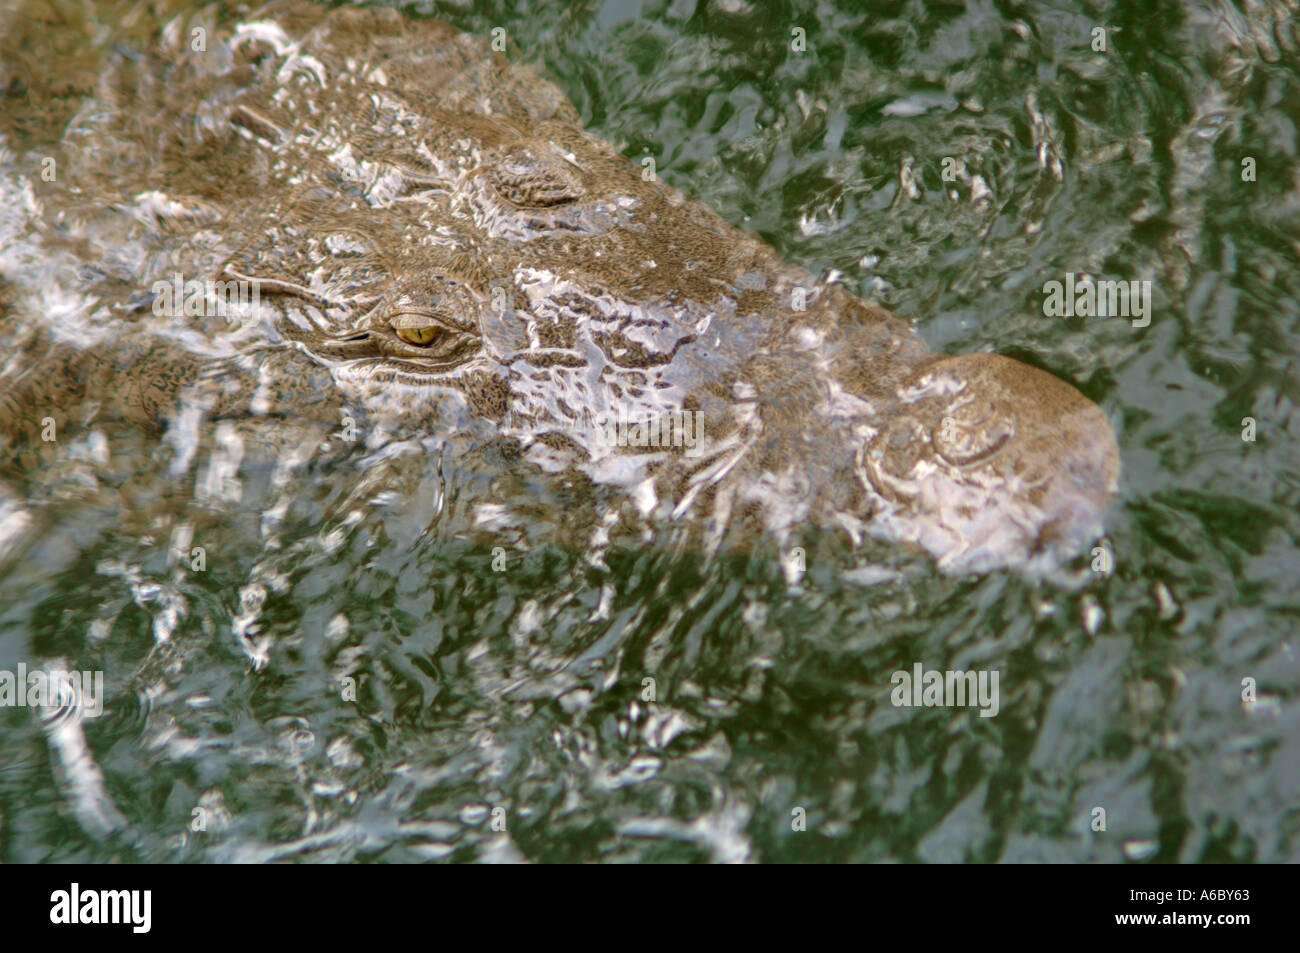 A color horizontal photo of the head of a Jamaican Crocodile in the Black River in Jamaica with its eye open Stock Photo